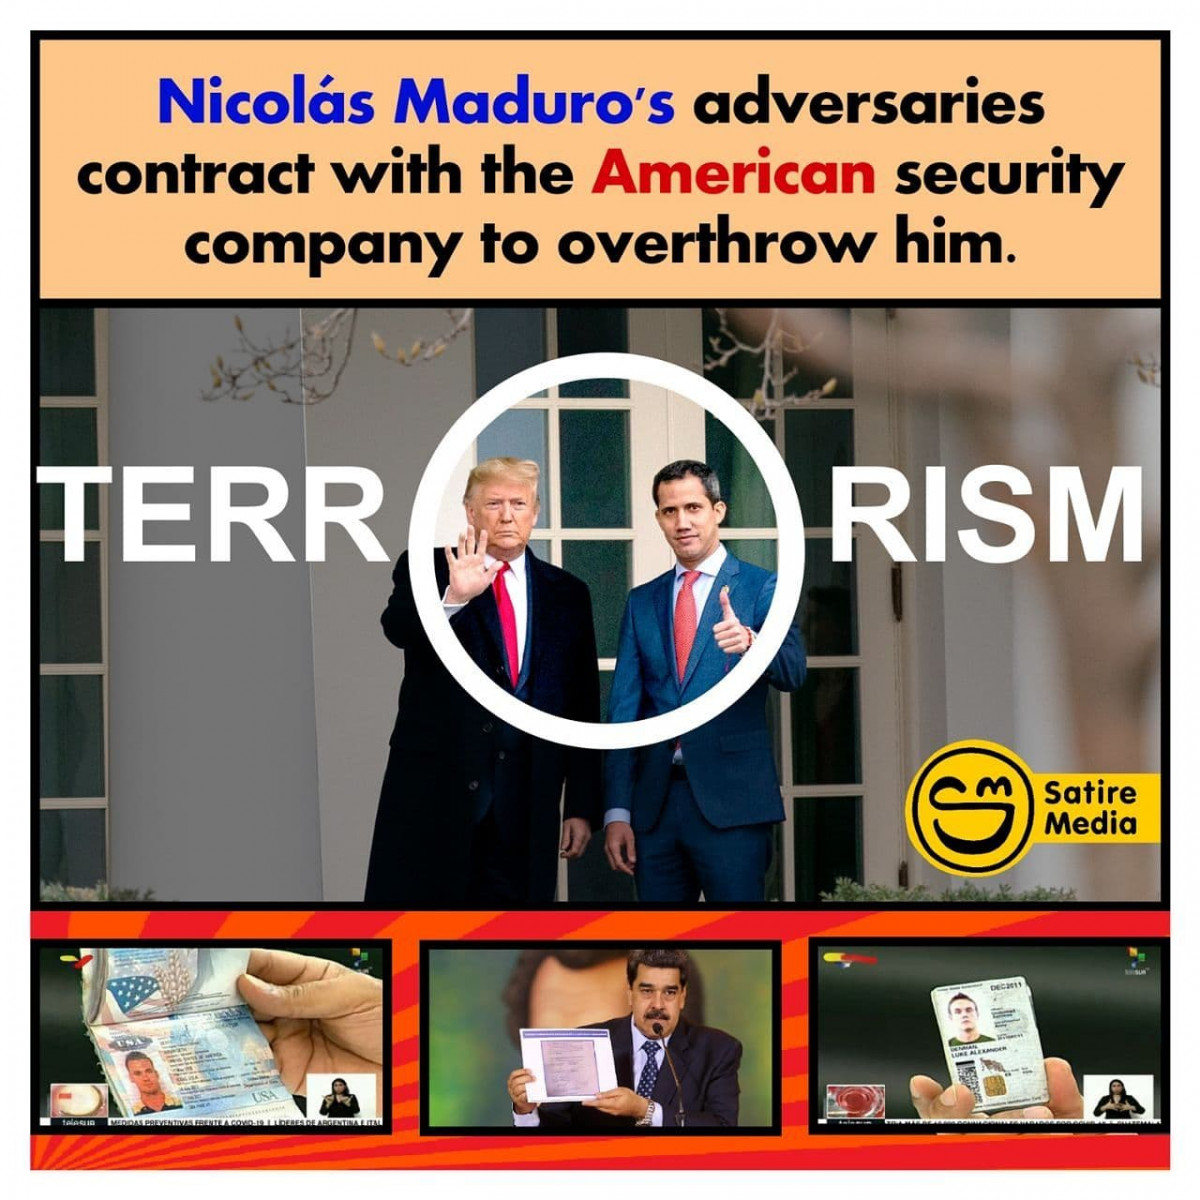 Nicolás Maduro's adversaries contract with the American security company to overthrow him